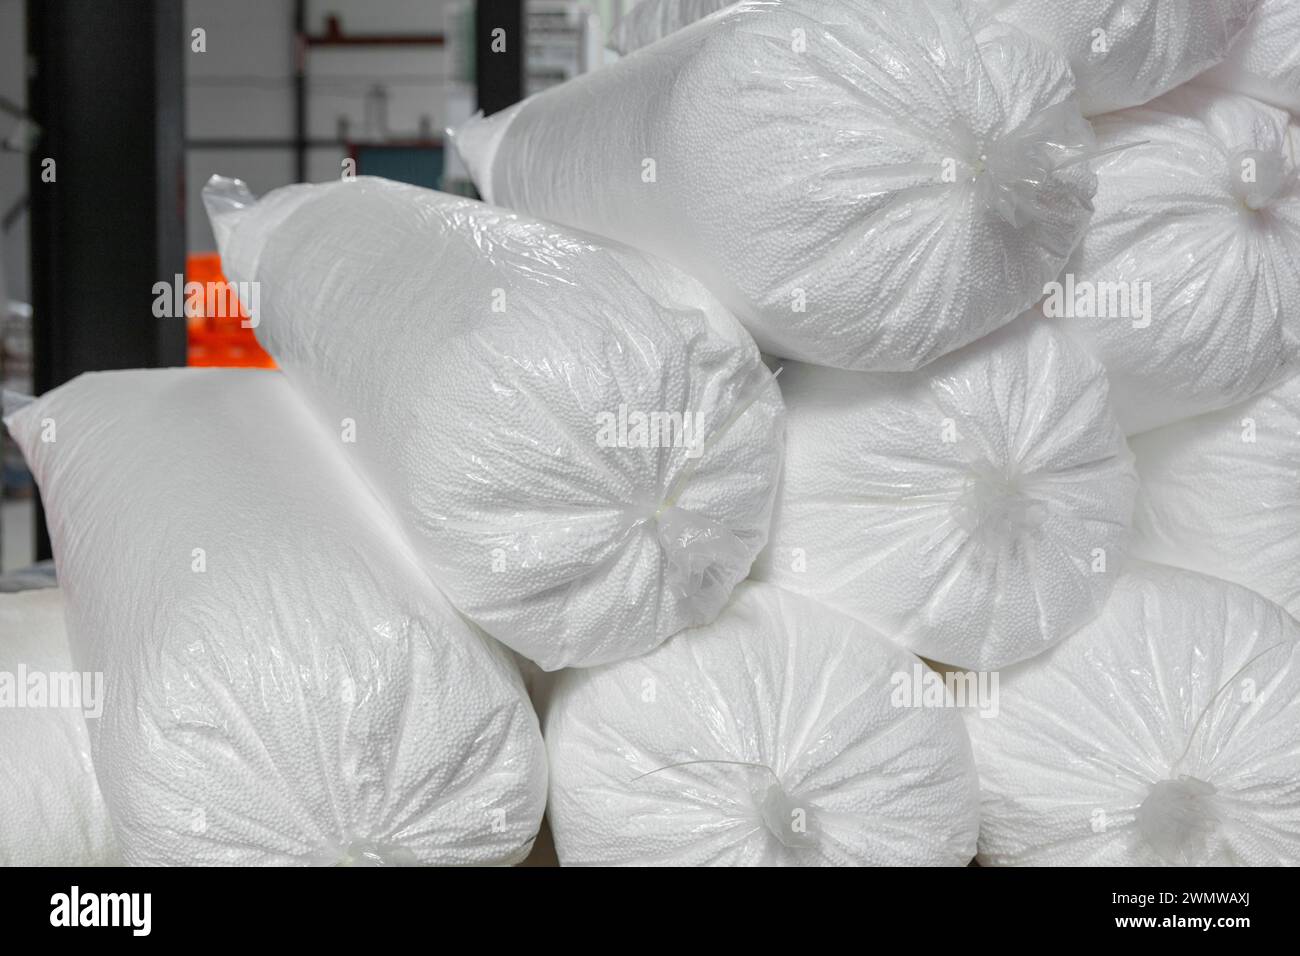 A bunch of bags of loose granular foam in a commercial warehouse. Loose foam is used as insulation to fill voids in building structures. Stock Photo